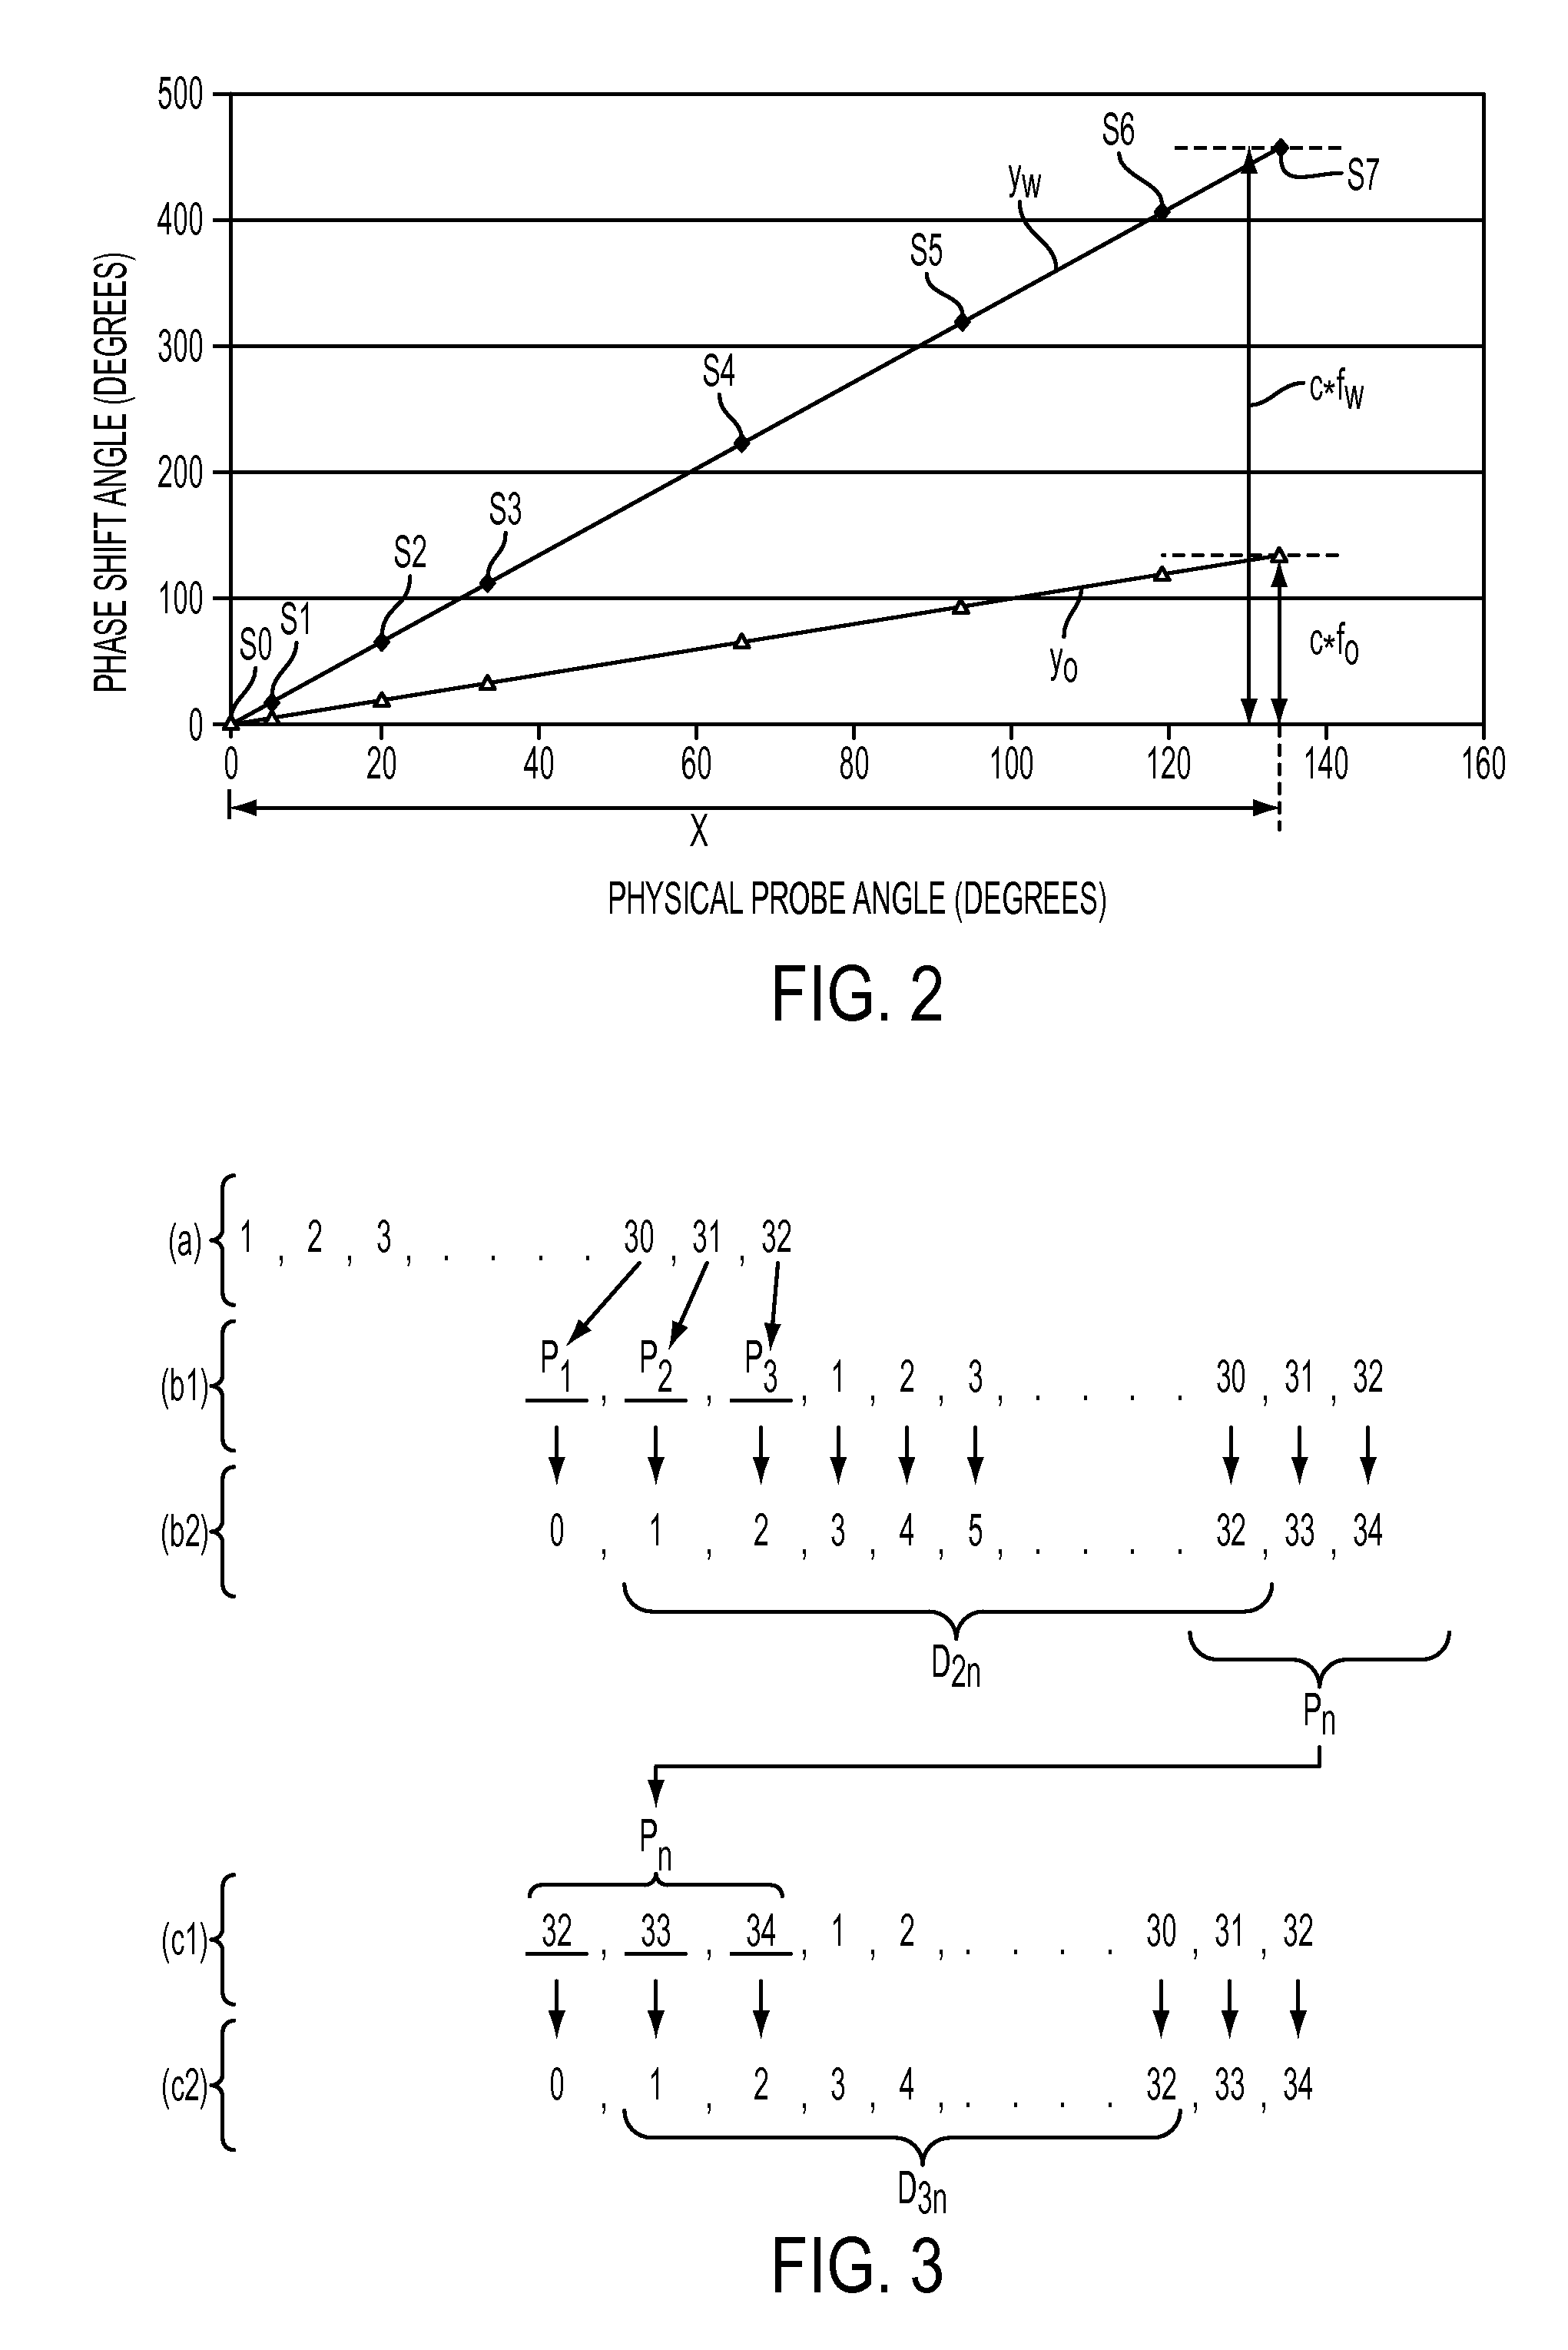 Method of analyzing non-synchronous vibrations using a dispersed array multi-probe machine